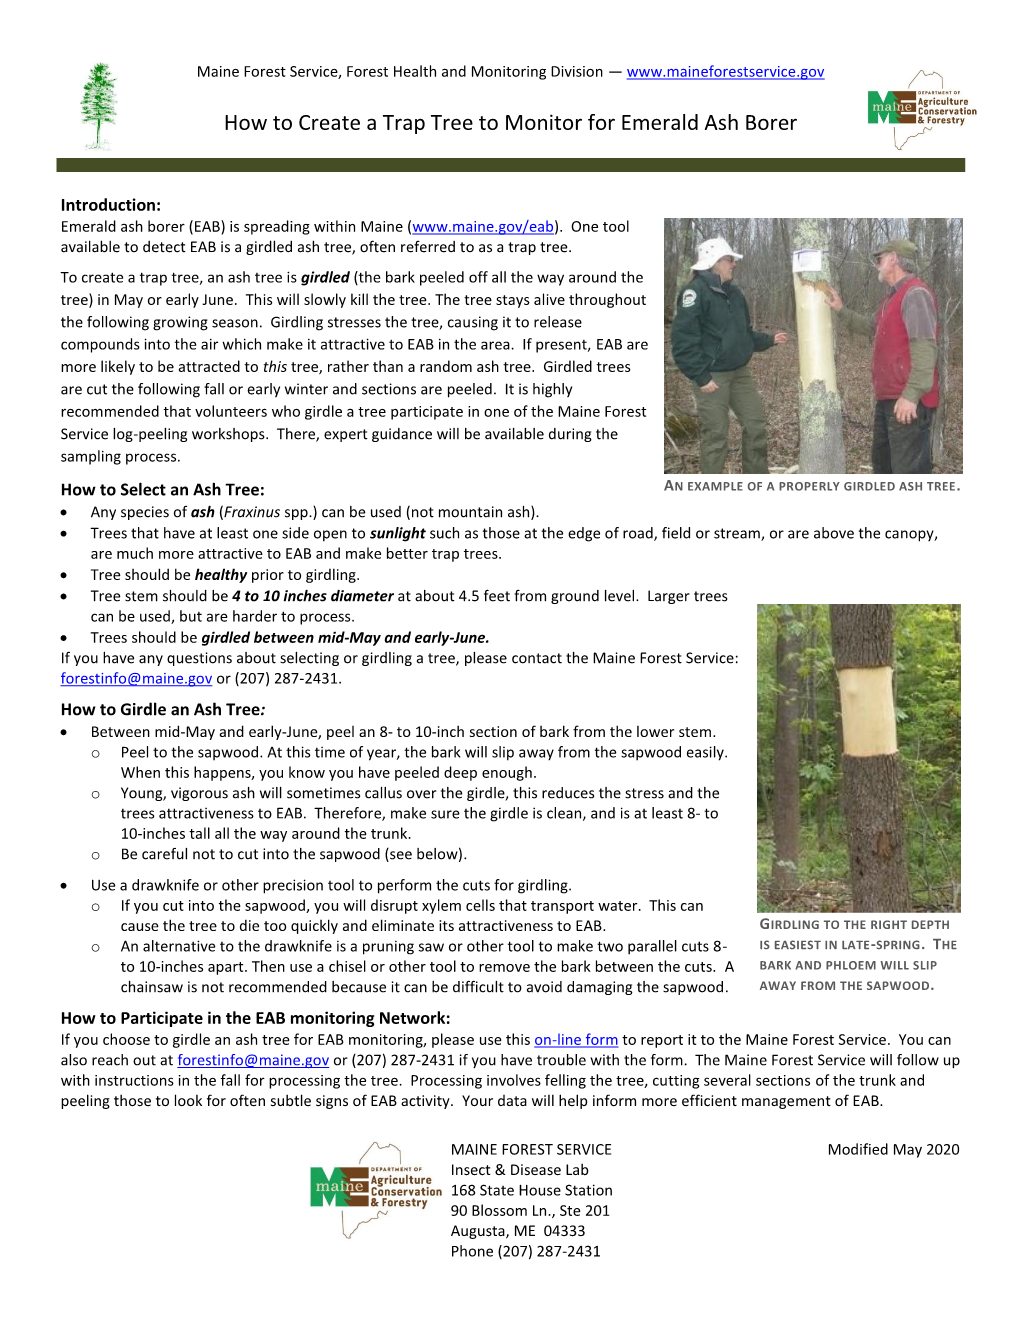 How to Create a Trap Tree to Monitor for Emerald Ash Borer